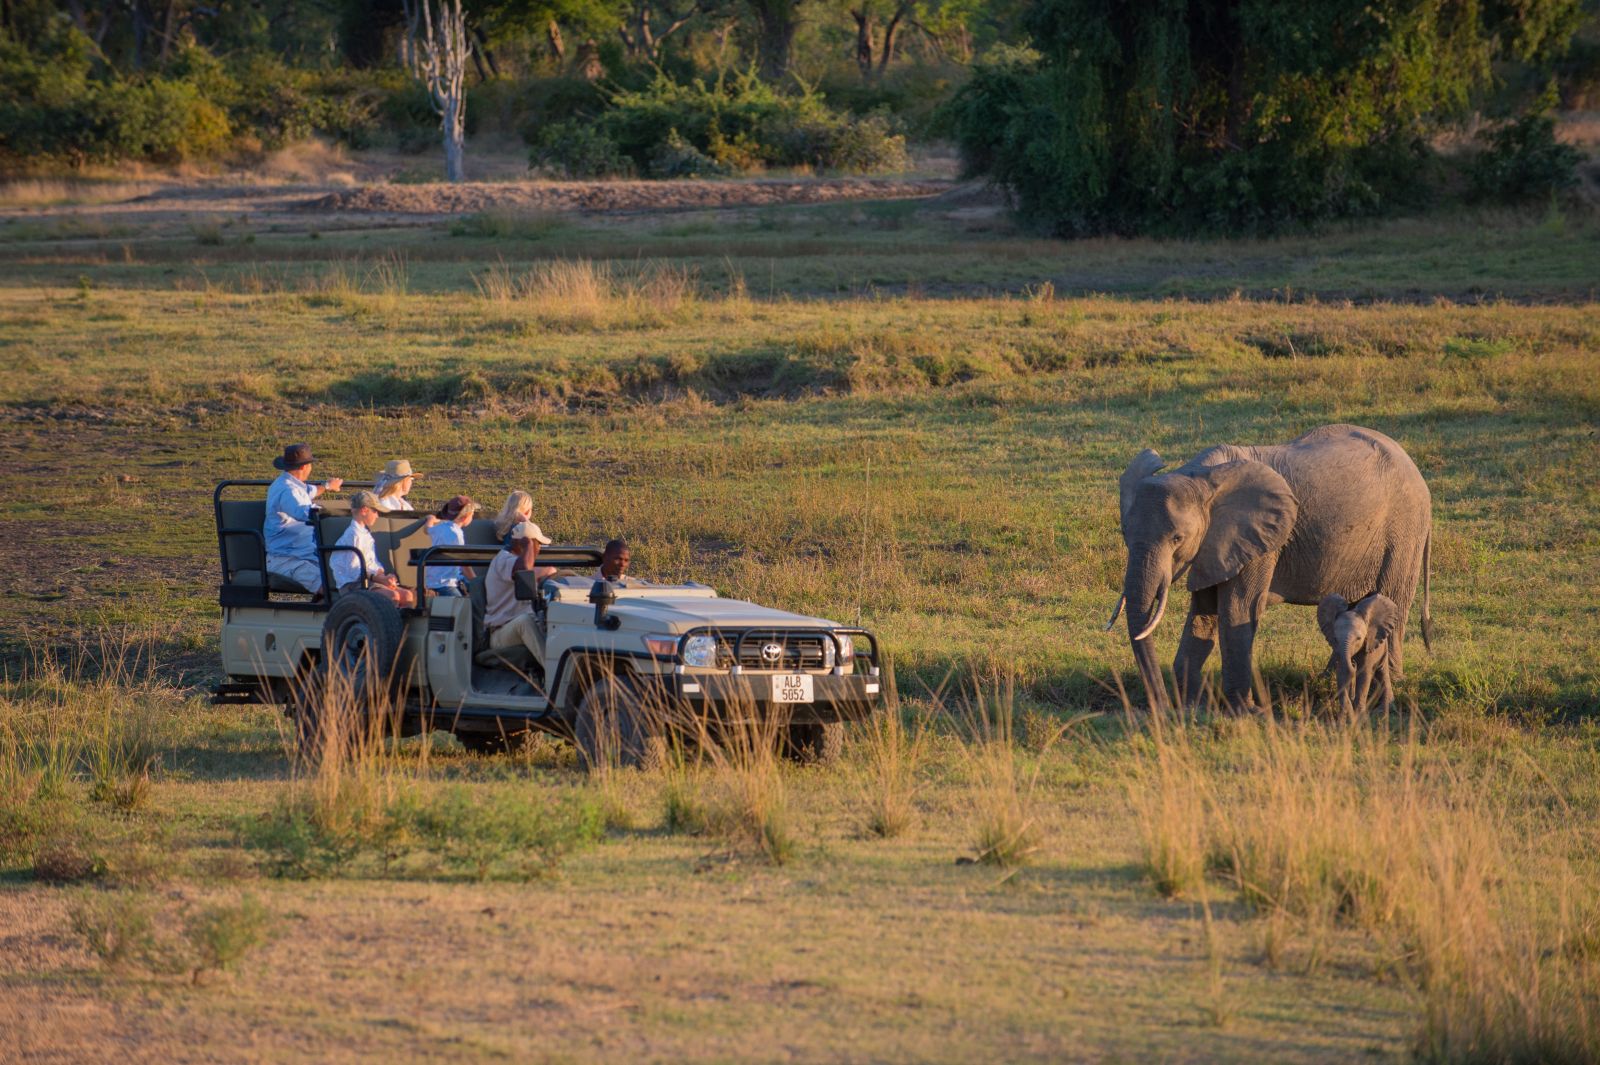 Family observing an elephant in a game drive from the Luangwa Safari House in Zambia